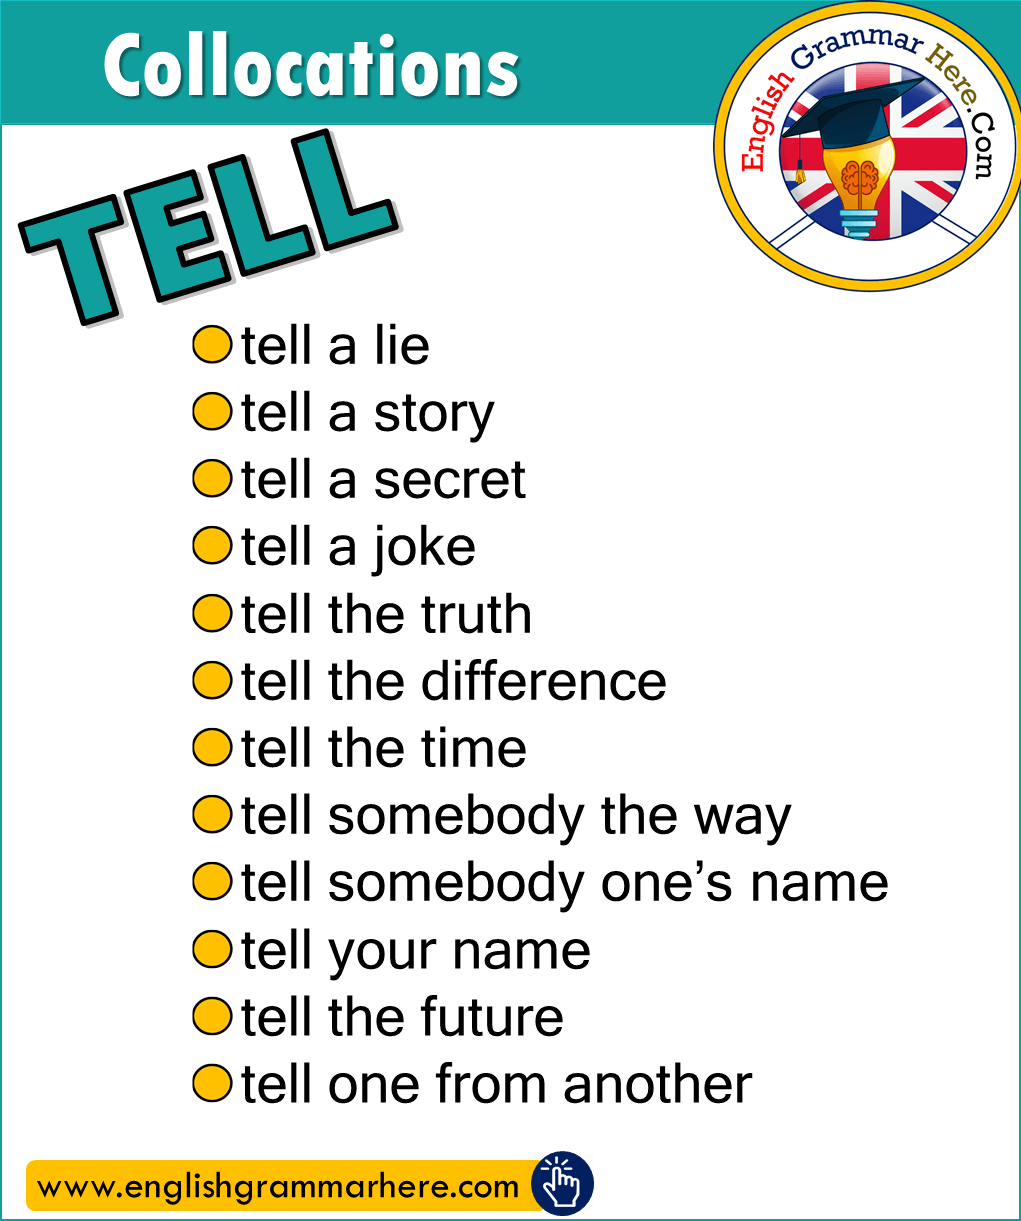 Collocations with TELL in English